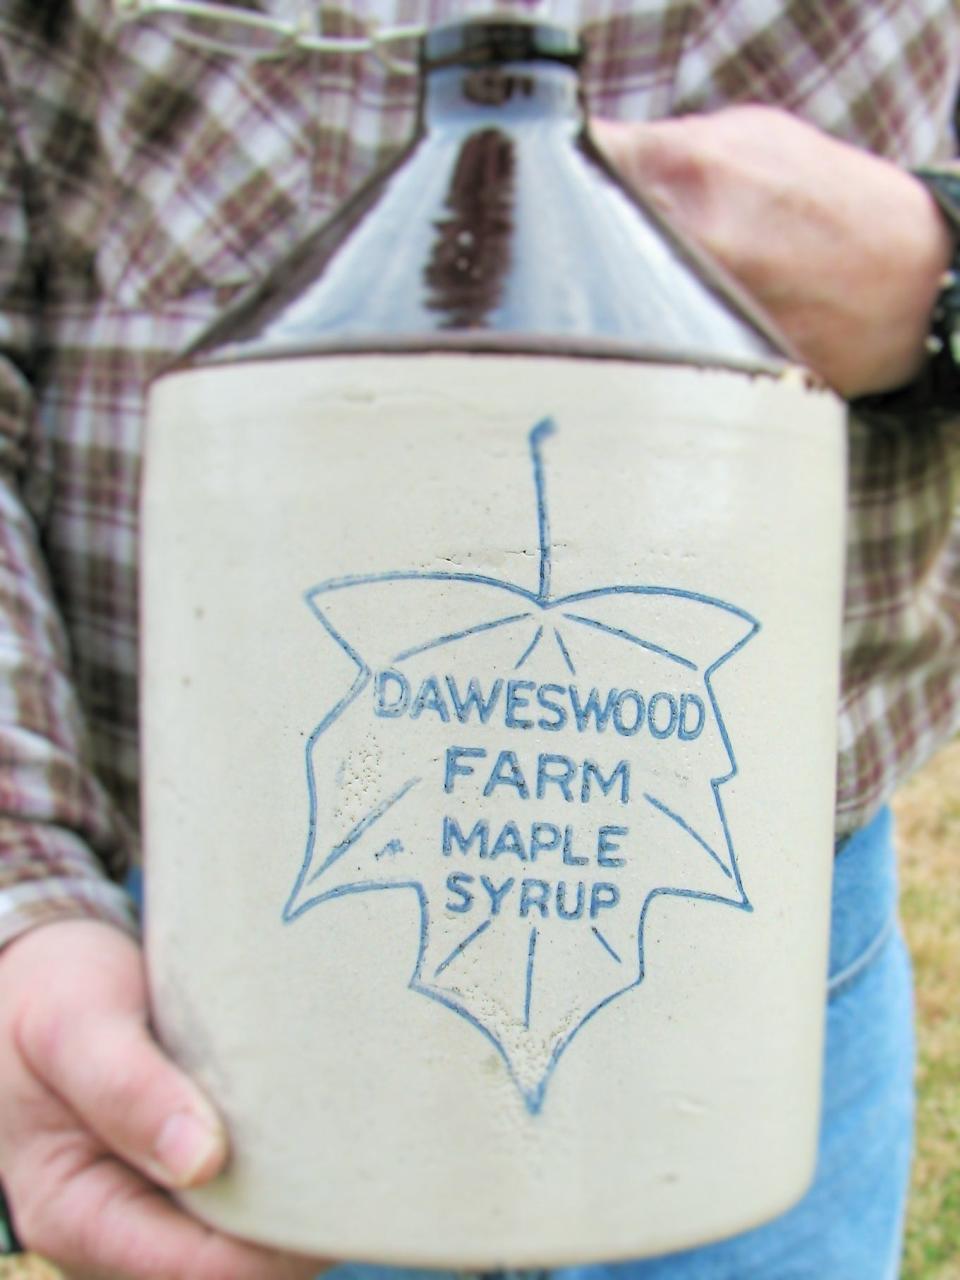 Guests can learn about maple sugaring while taking a walking tour during Maple Syrup Days on Saturday and Sunday at The Dawes Arboretum in Newark.